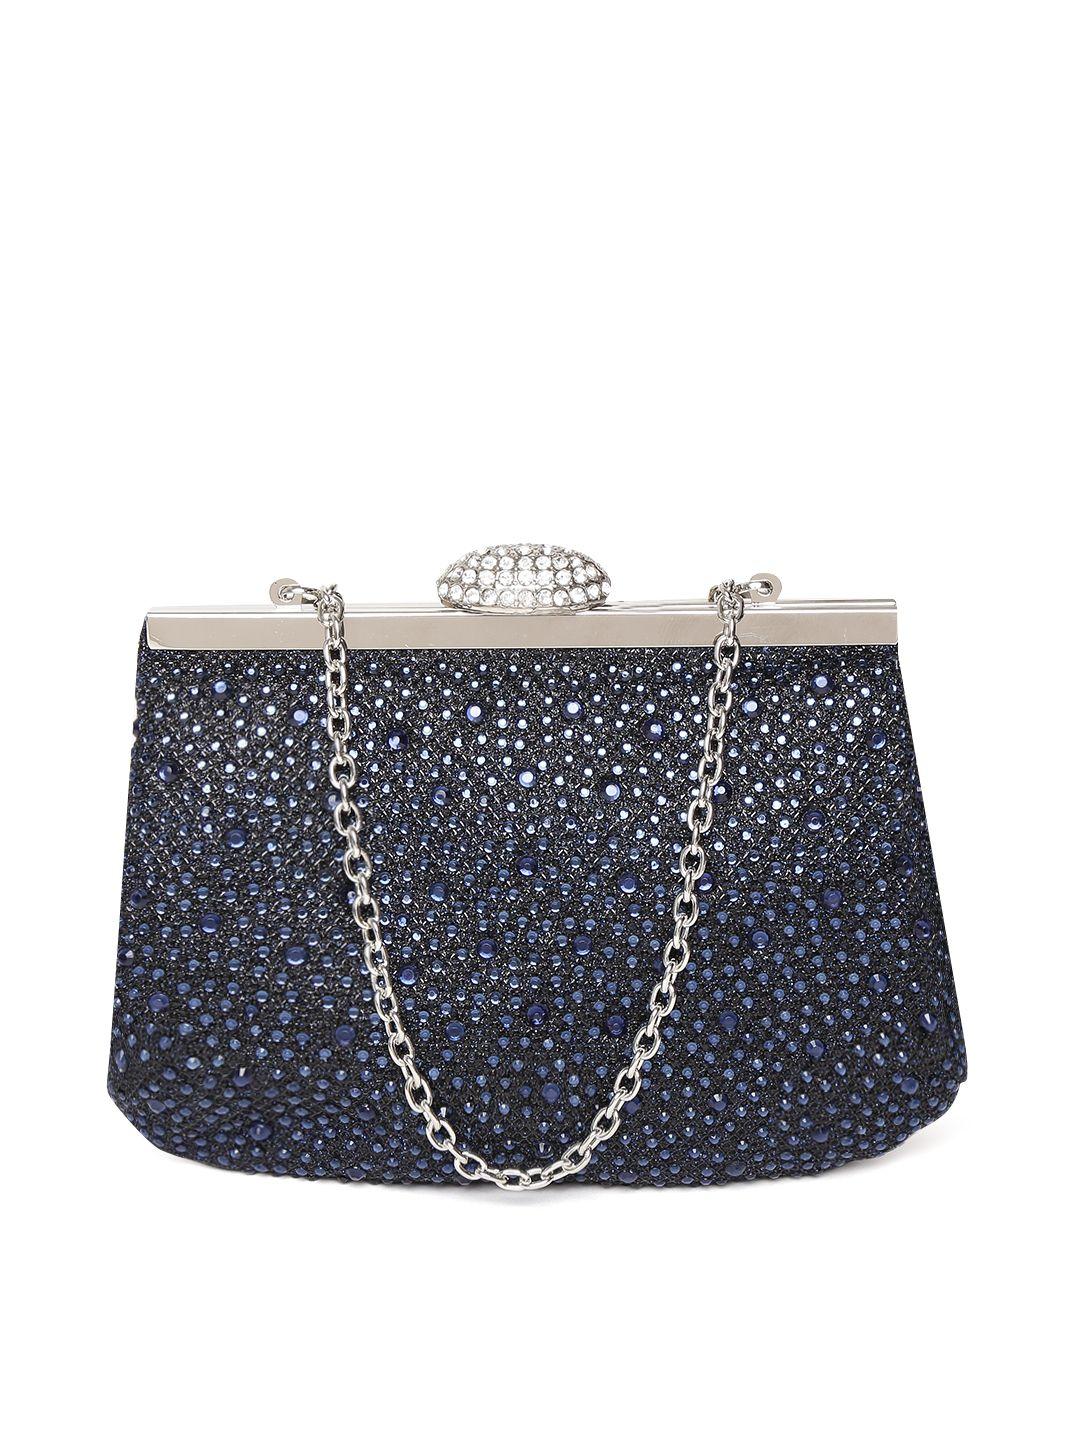 giordano navy blue embellished clutch with chain strap